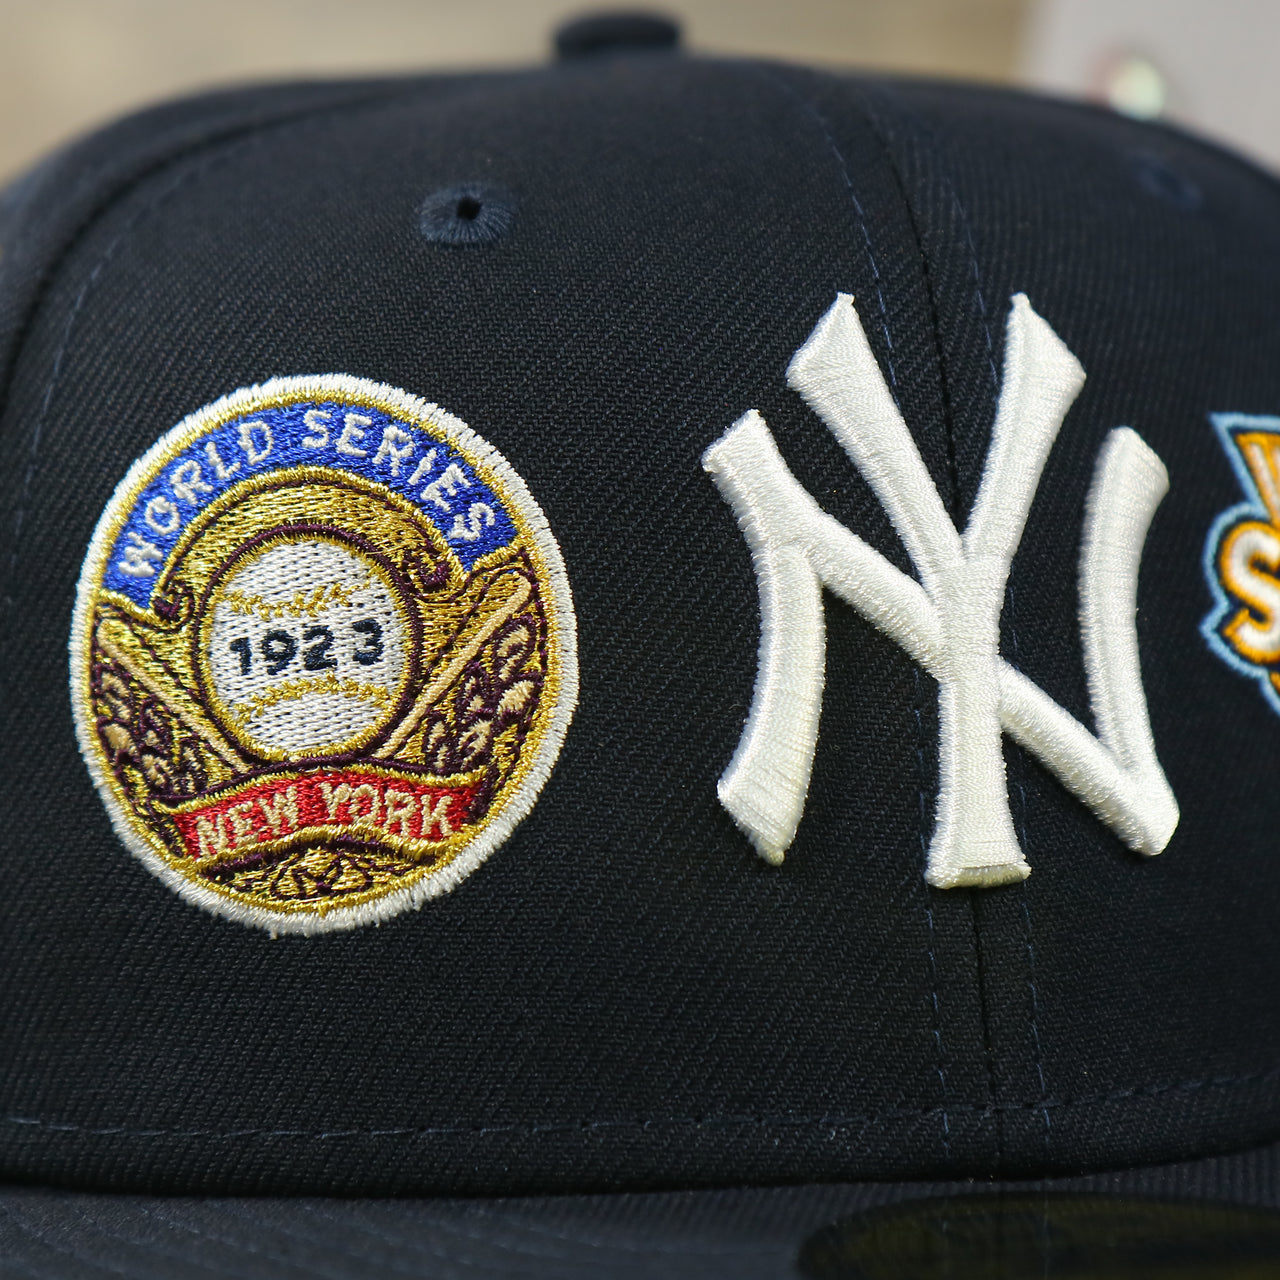 1923 world series patch and new york yankees logo on the New York Yankees Cooperstown All Over Side Patch "Historic Champs" Gray UV 59Fifty Fitted Cap | Navy 59Fifty Fitted Cap